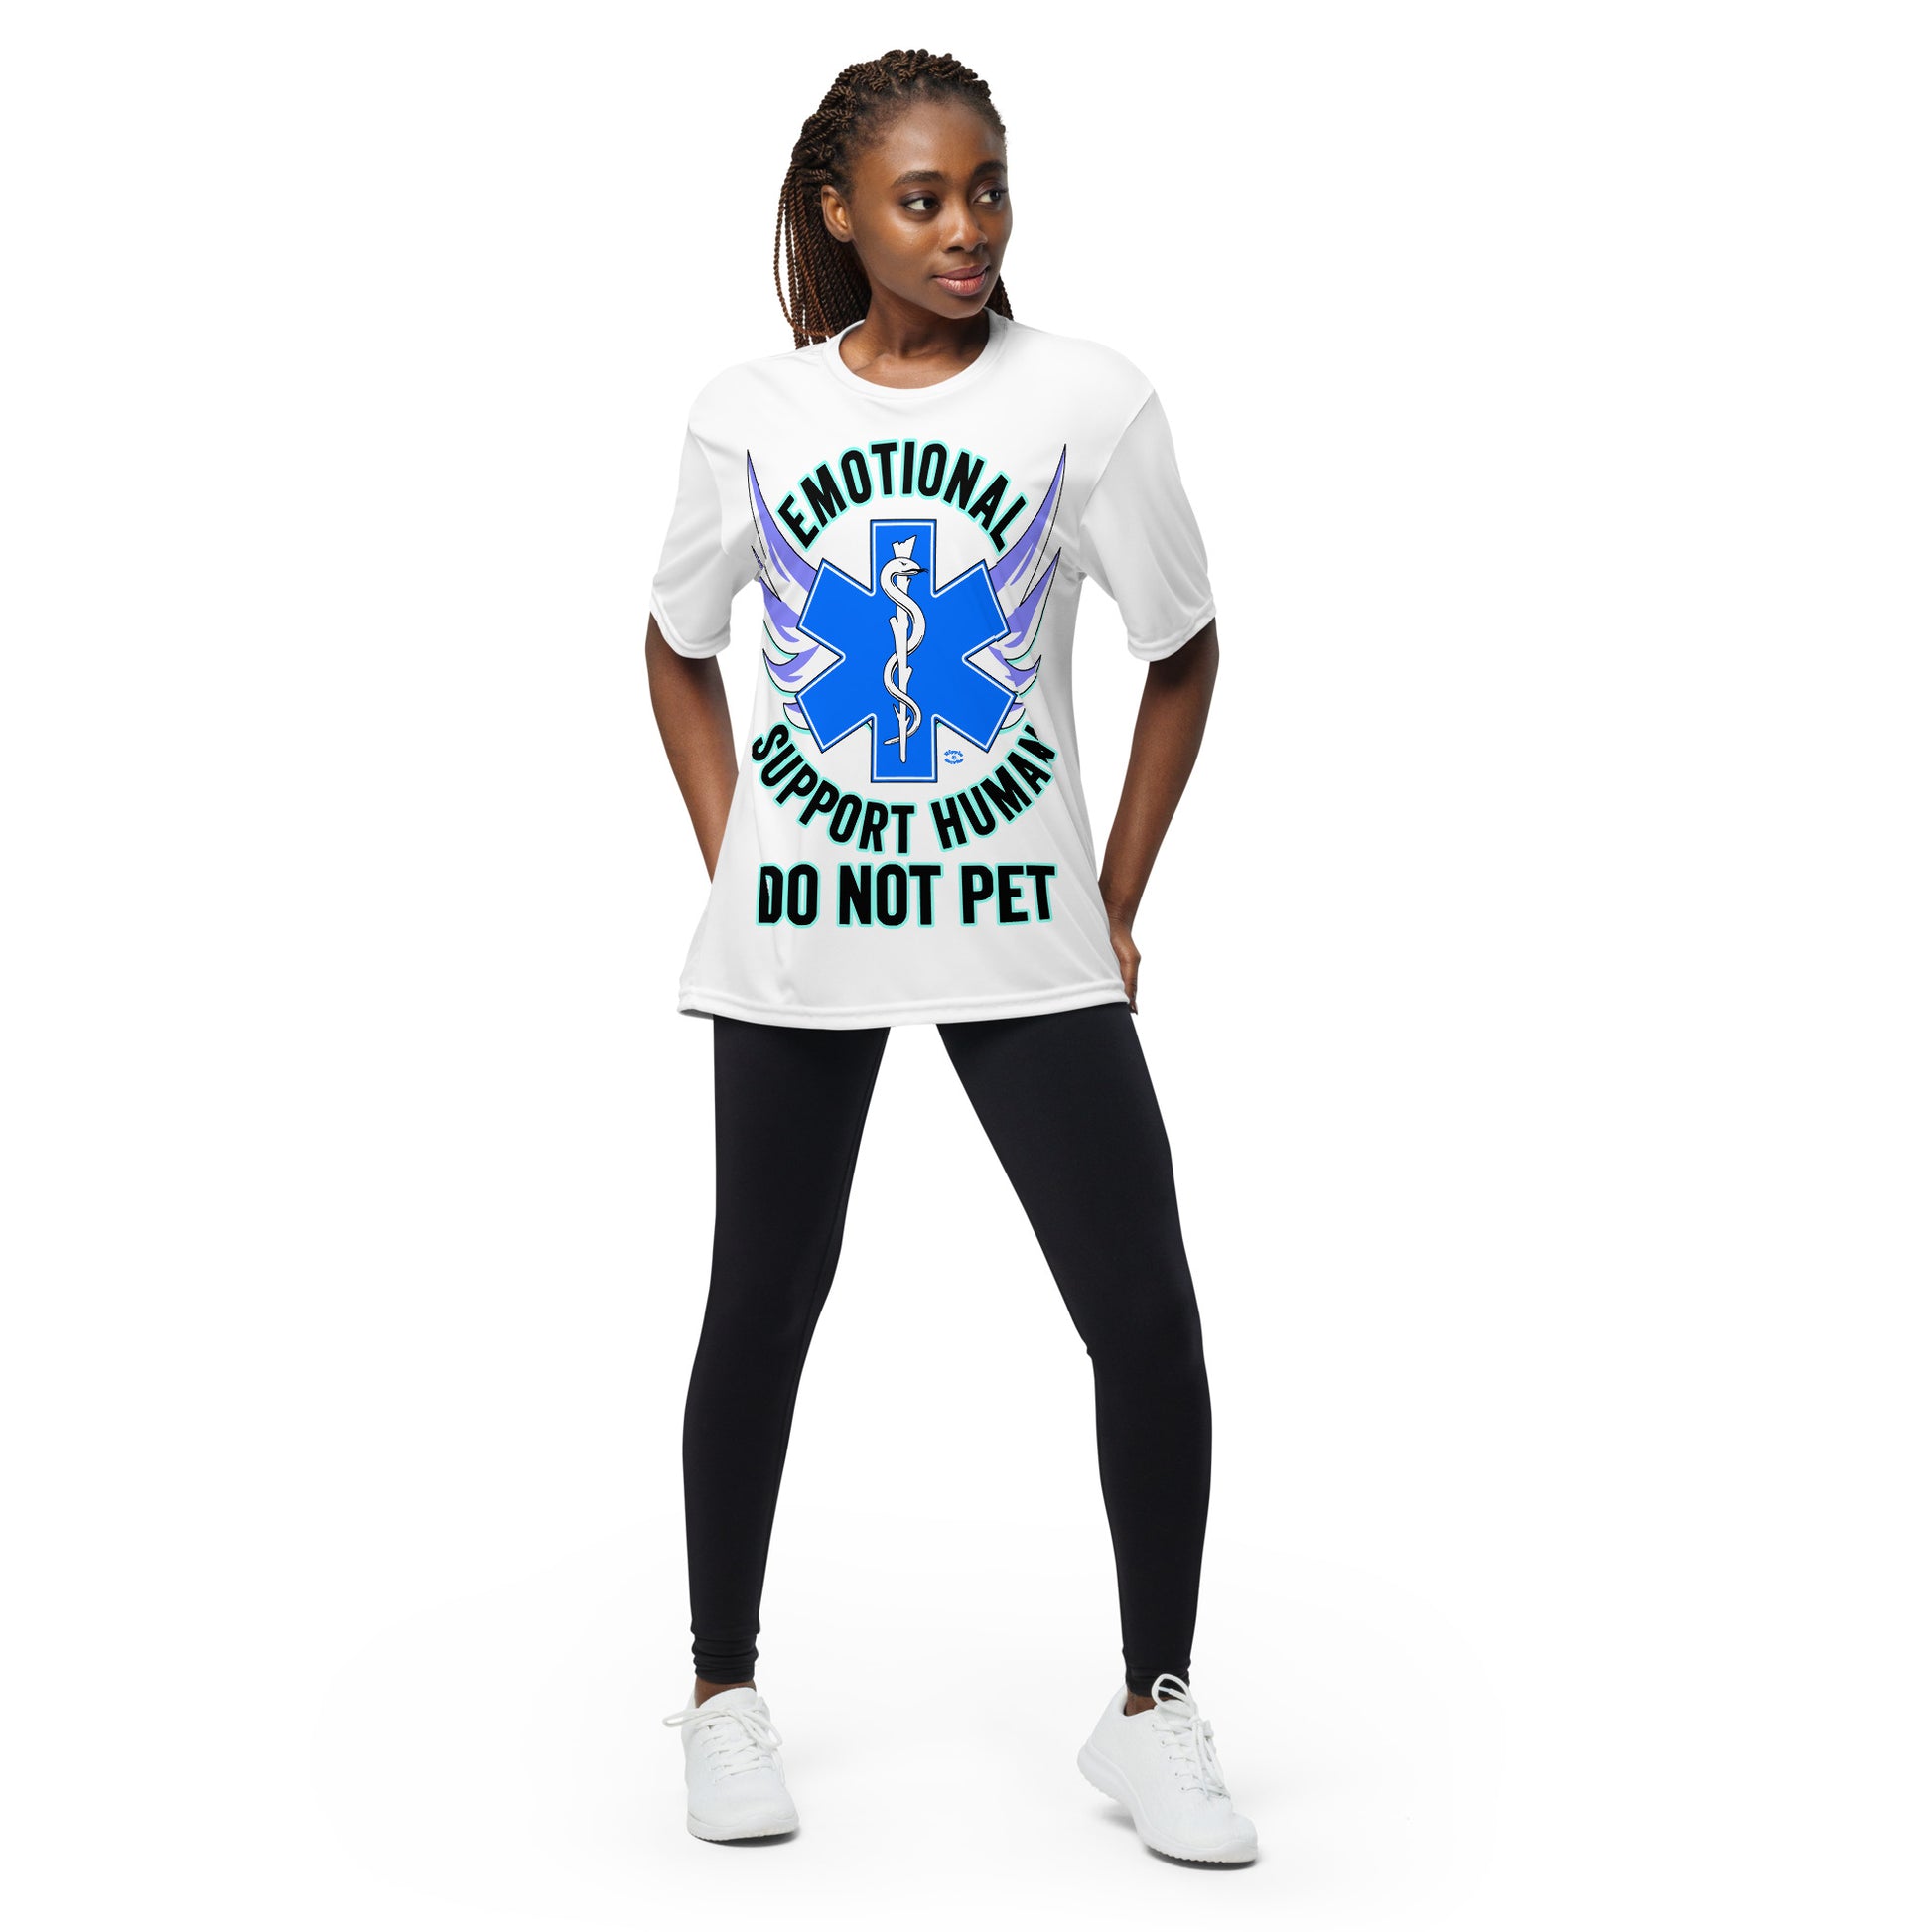 A woman wearing a tshirt with a big blue cross and a Rod of Asclepius inside. Text around the cross says Emotional Support Human DO NOT PET - white